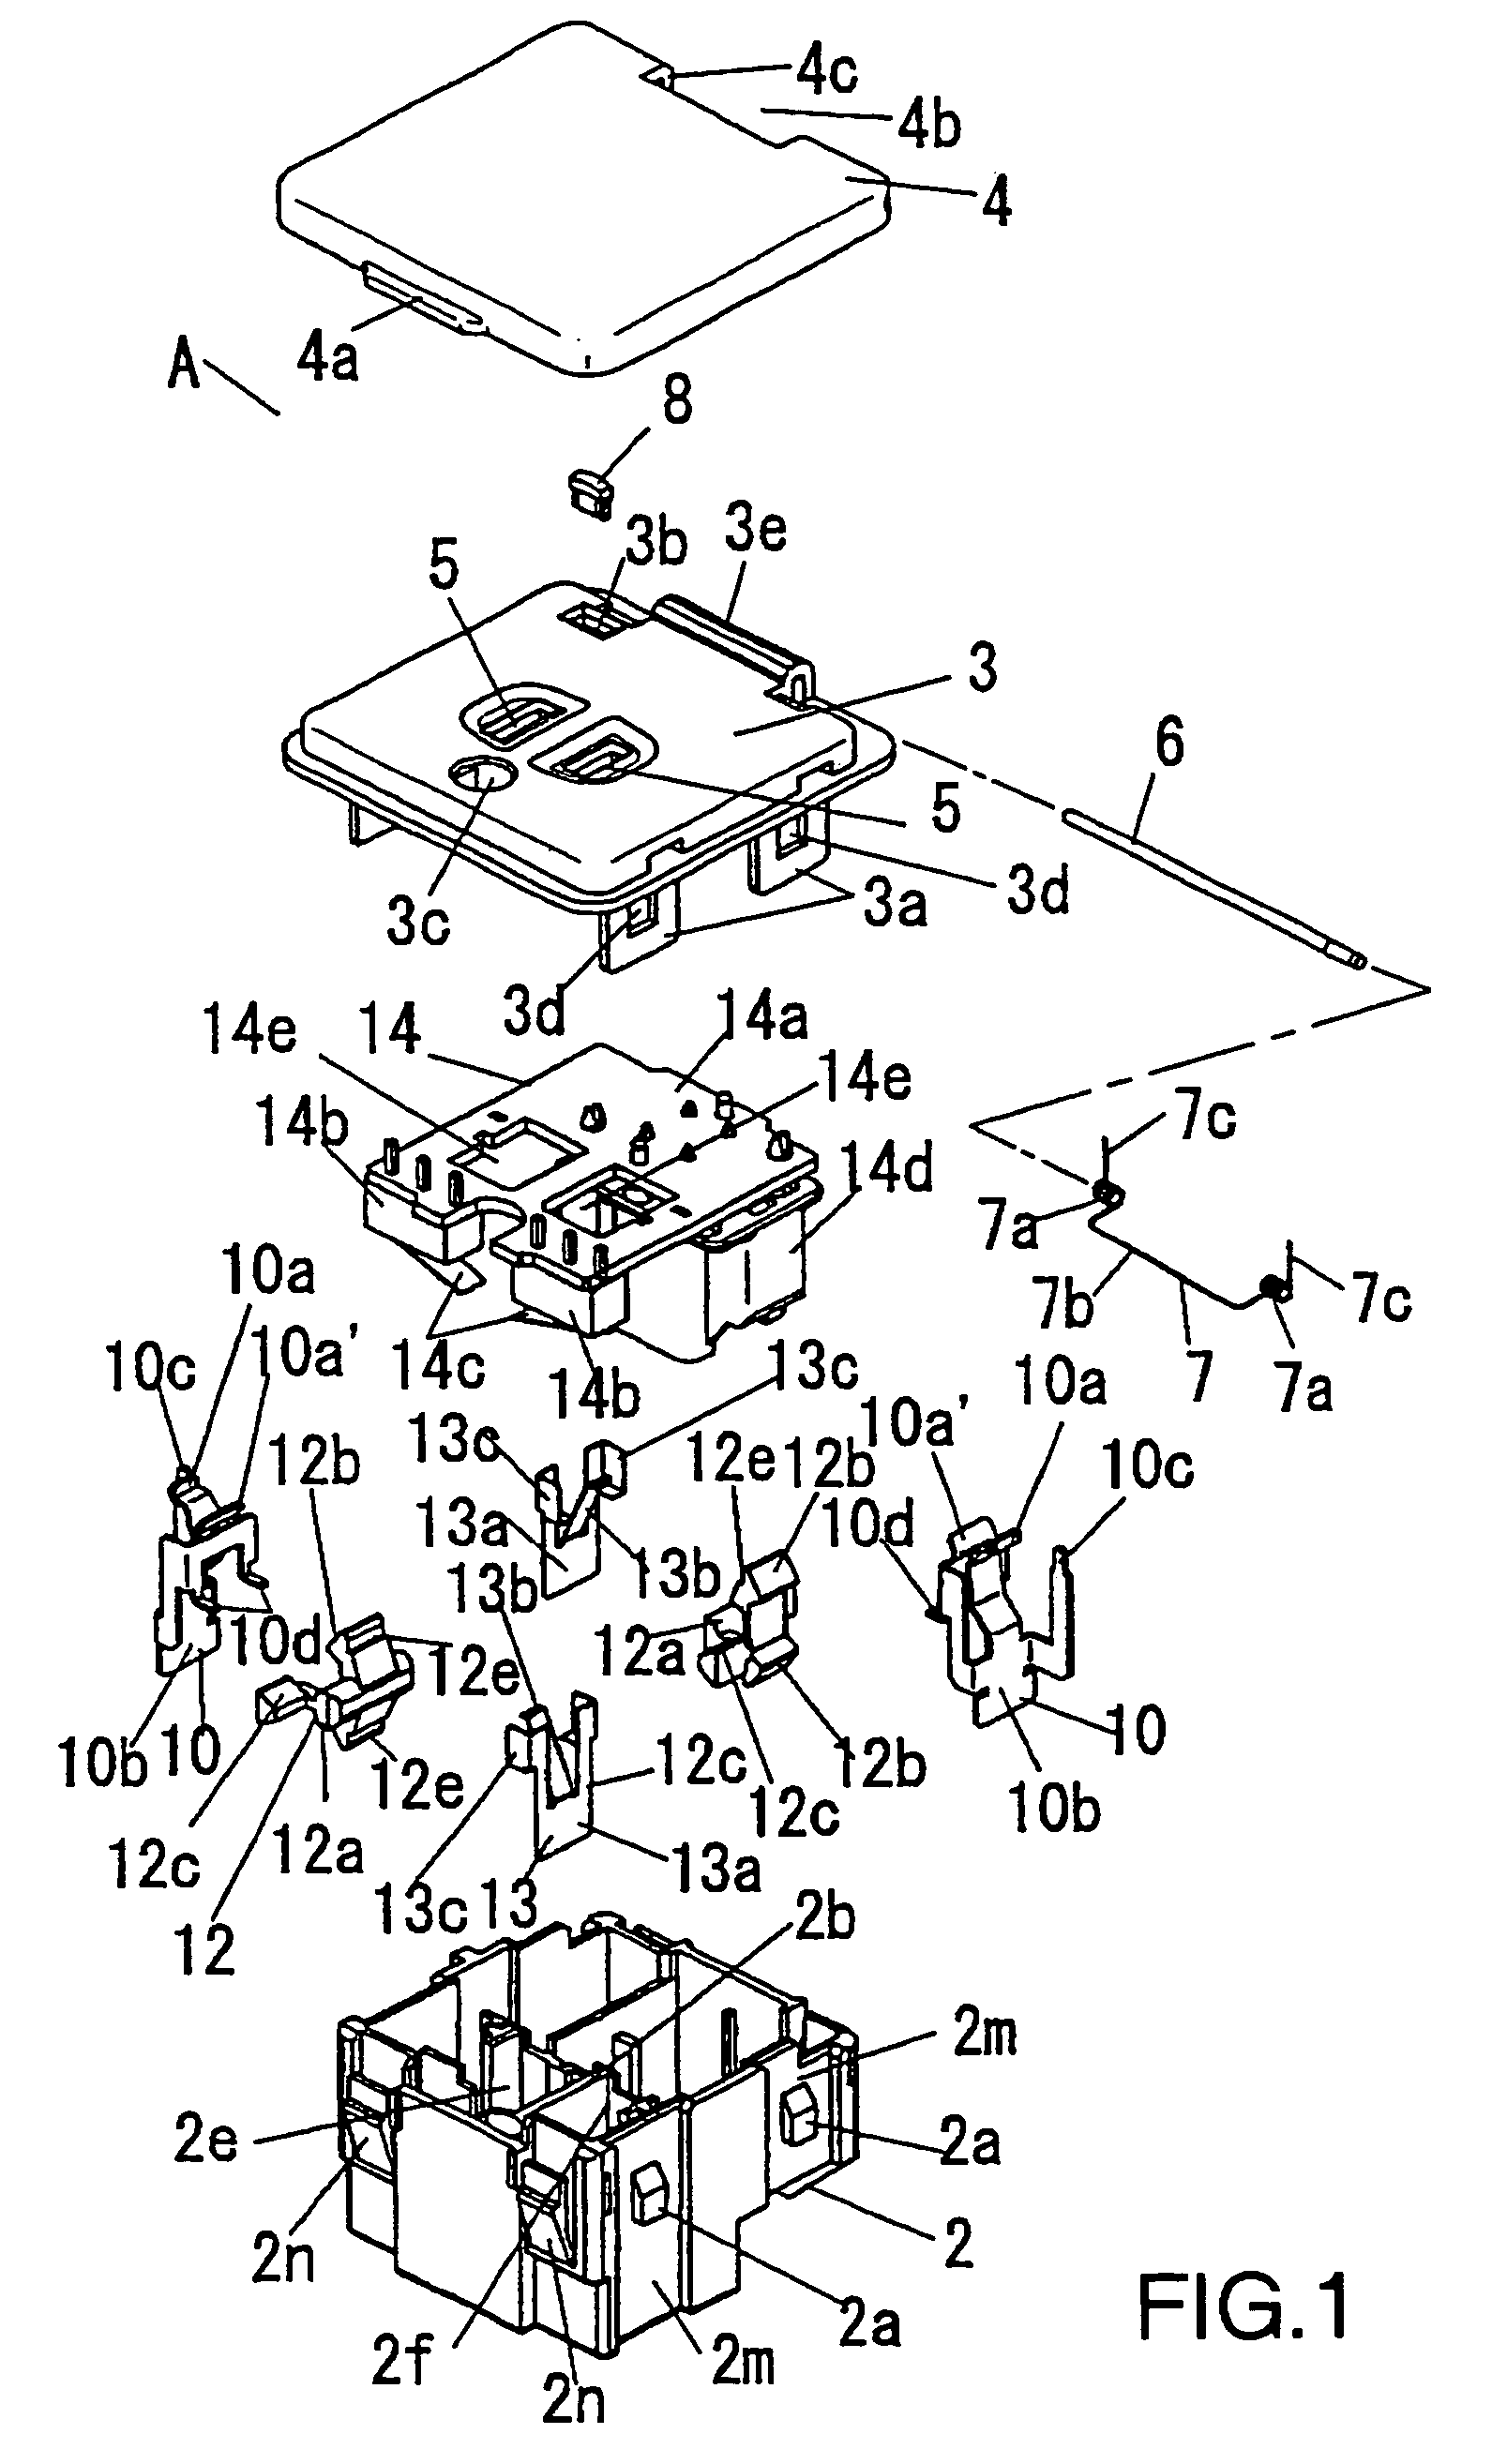 Vehicle mounted electrical outlet box